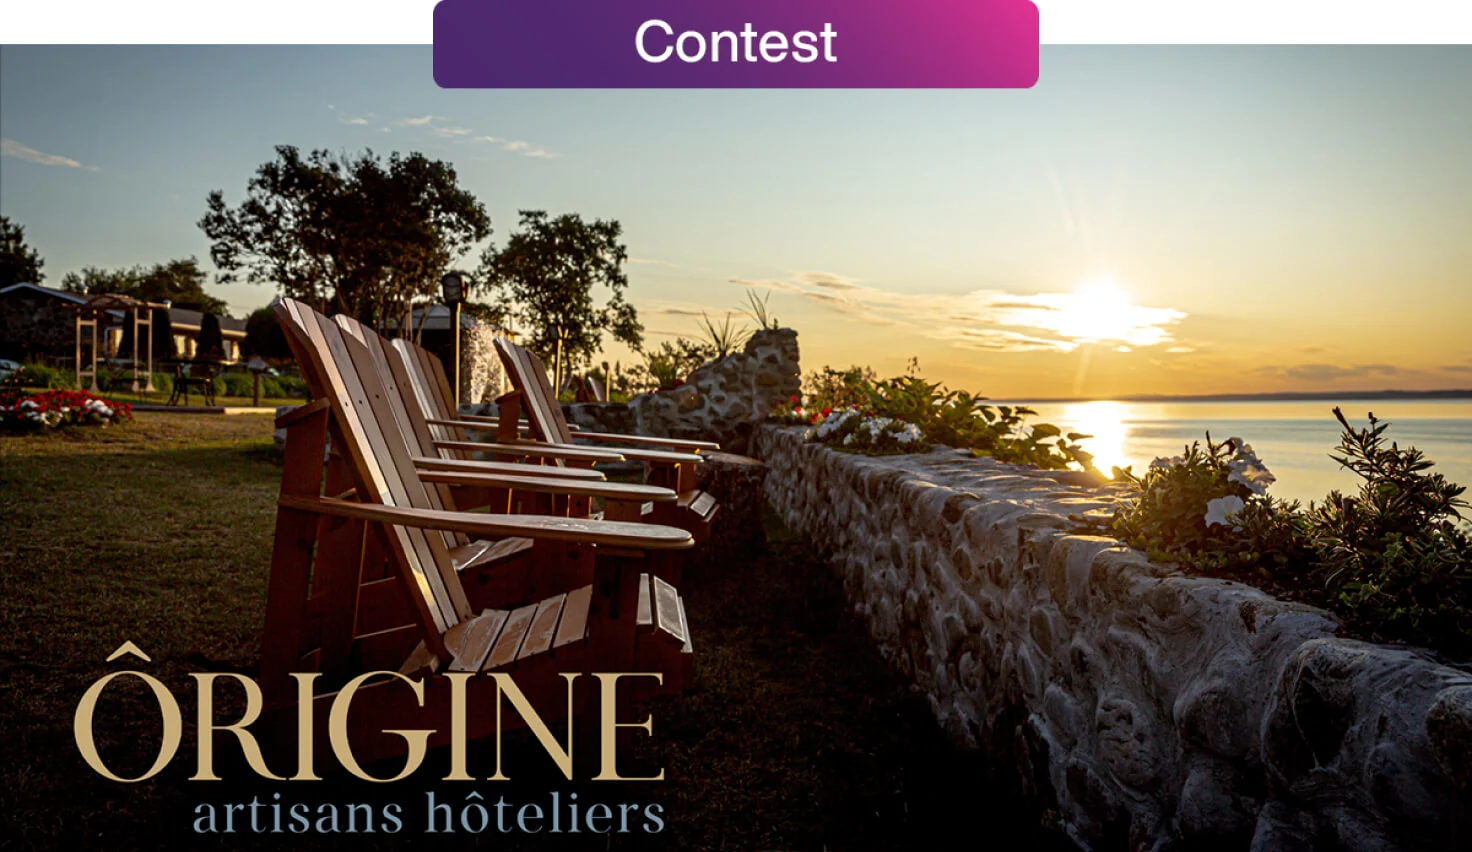 On a beautiful sunset day, there is a line of chairs overlooking a lake, bearing the phrase "Ôrigine artisans hôteliers."